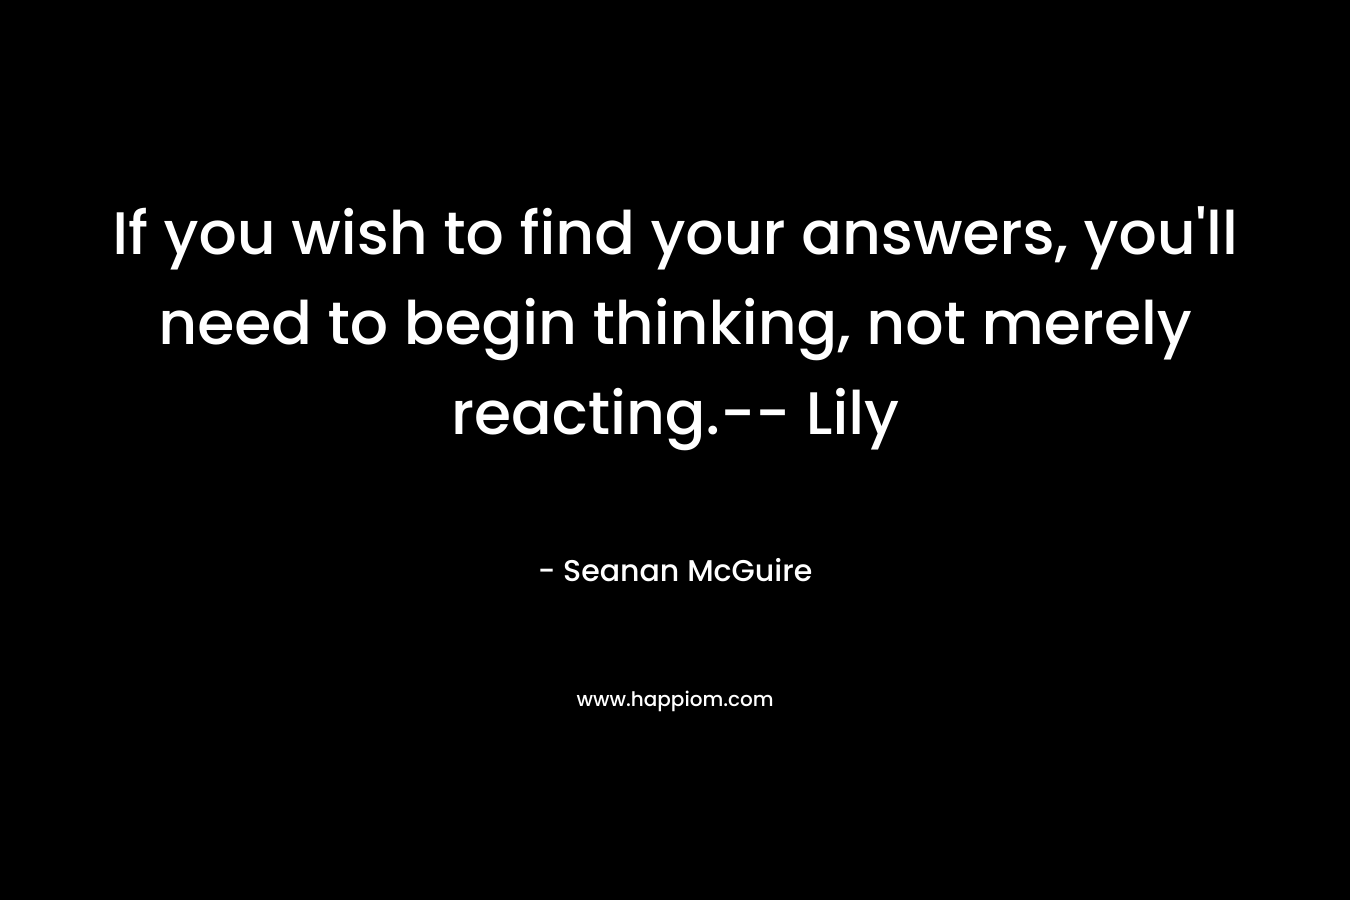 If you wish to find your answers, you'll need to begin thinking, not merely reacting.-- Lily